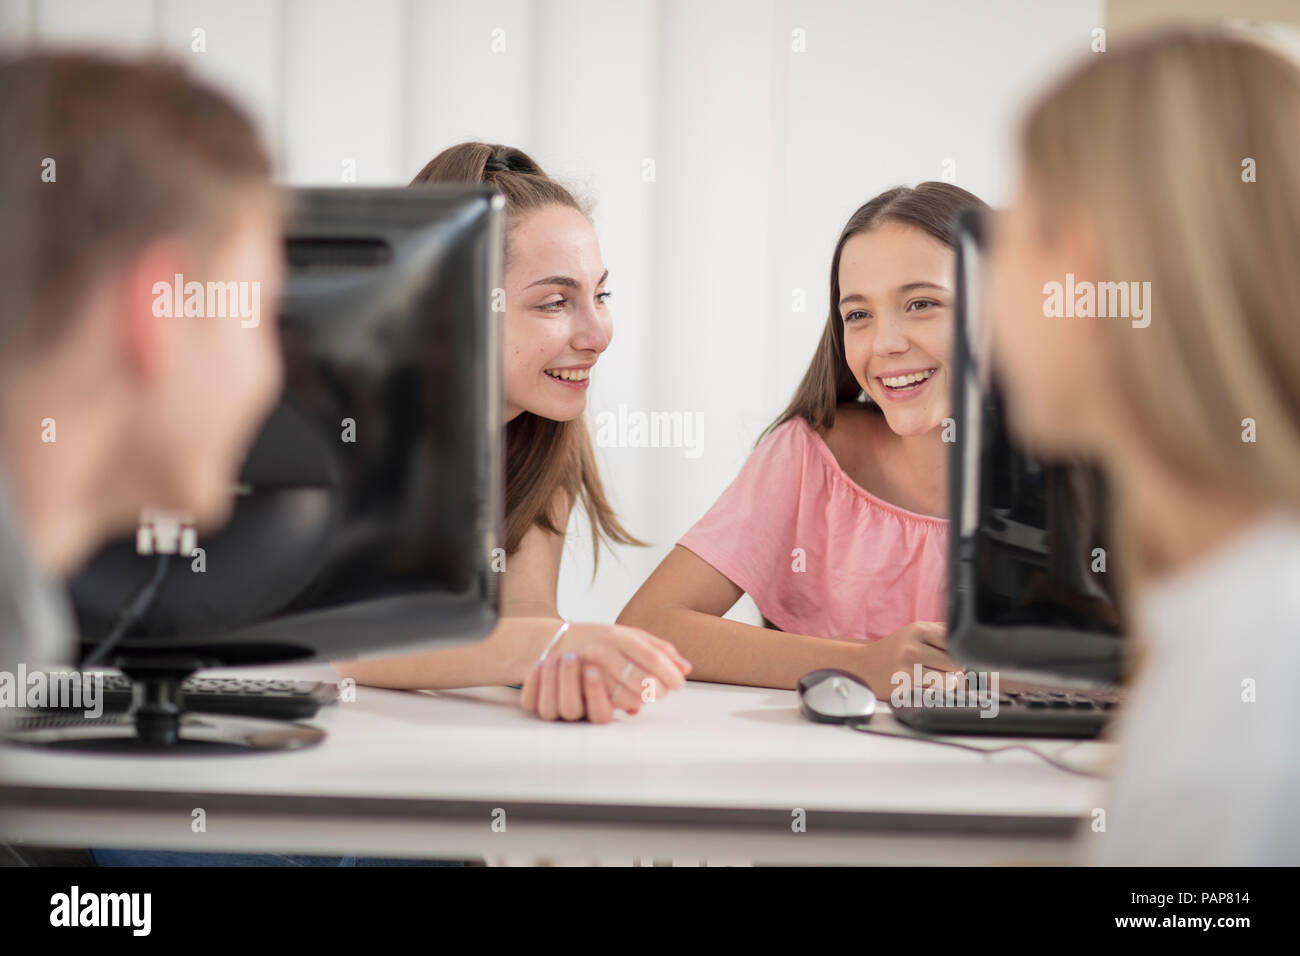 Students talking in computer class Stock Photo